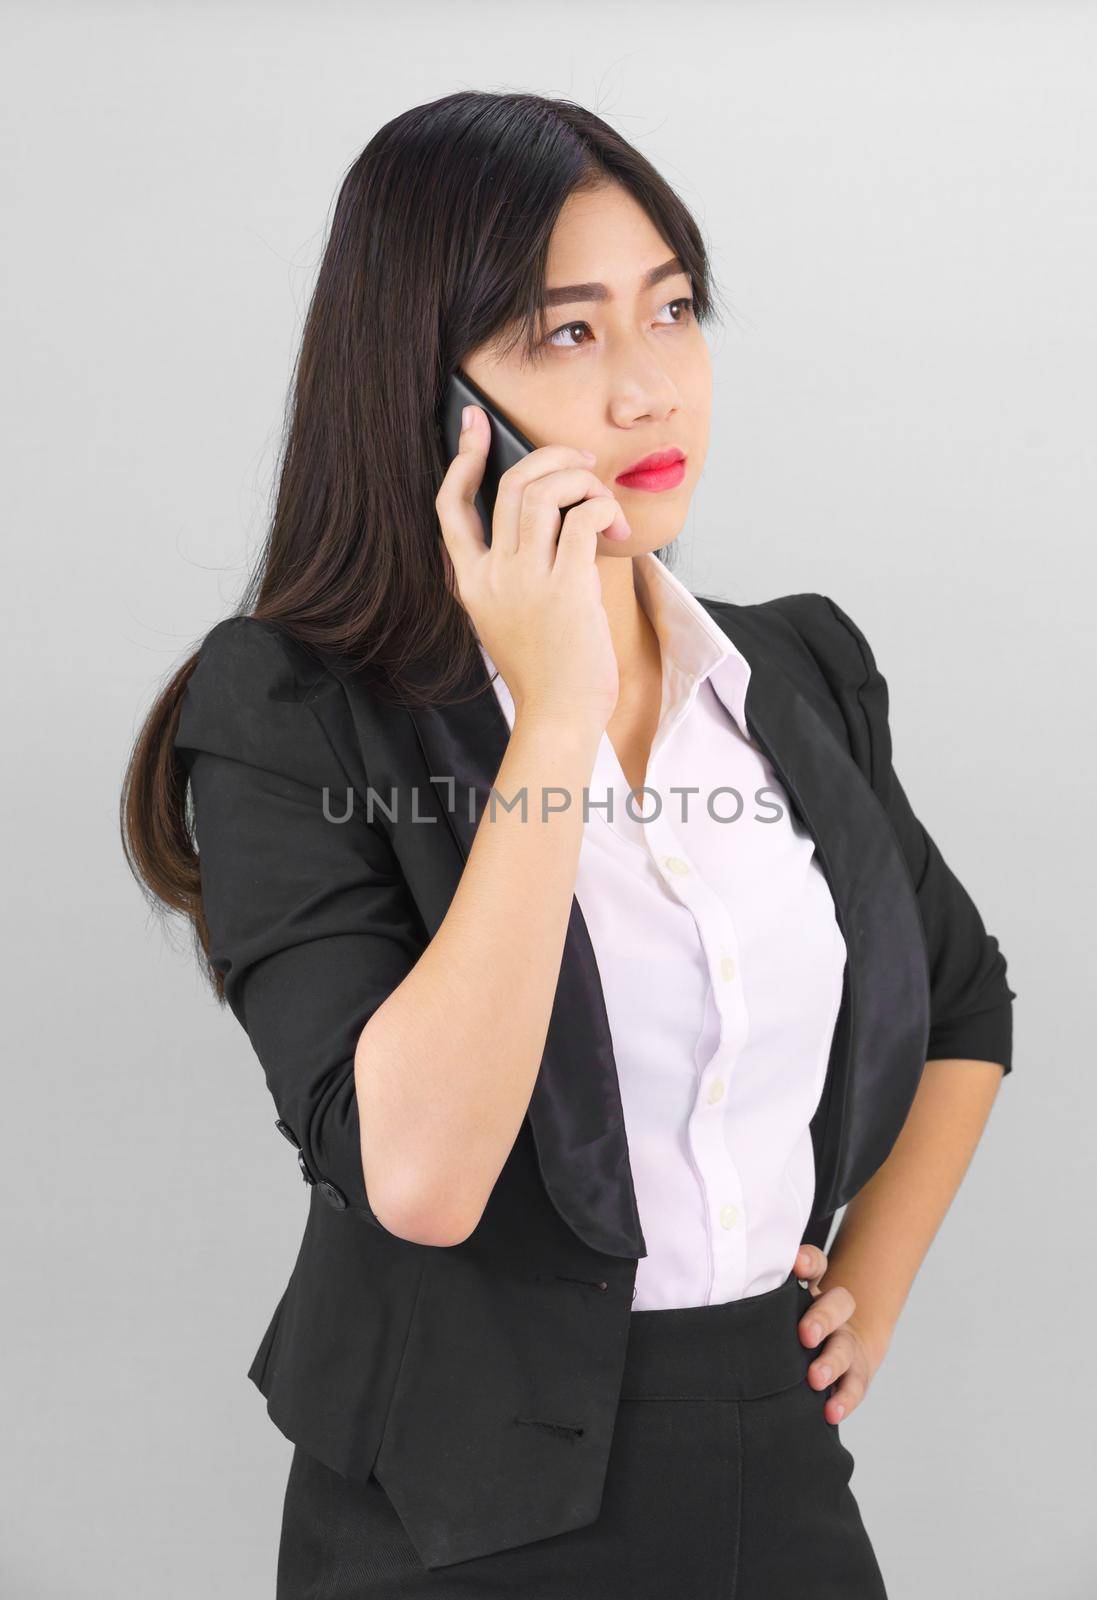 Young Asian women in suit standing posing using her phone against gray background